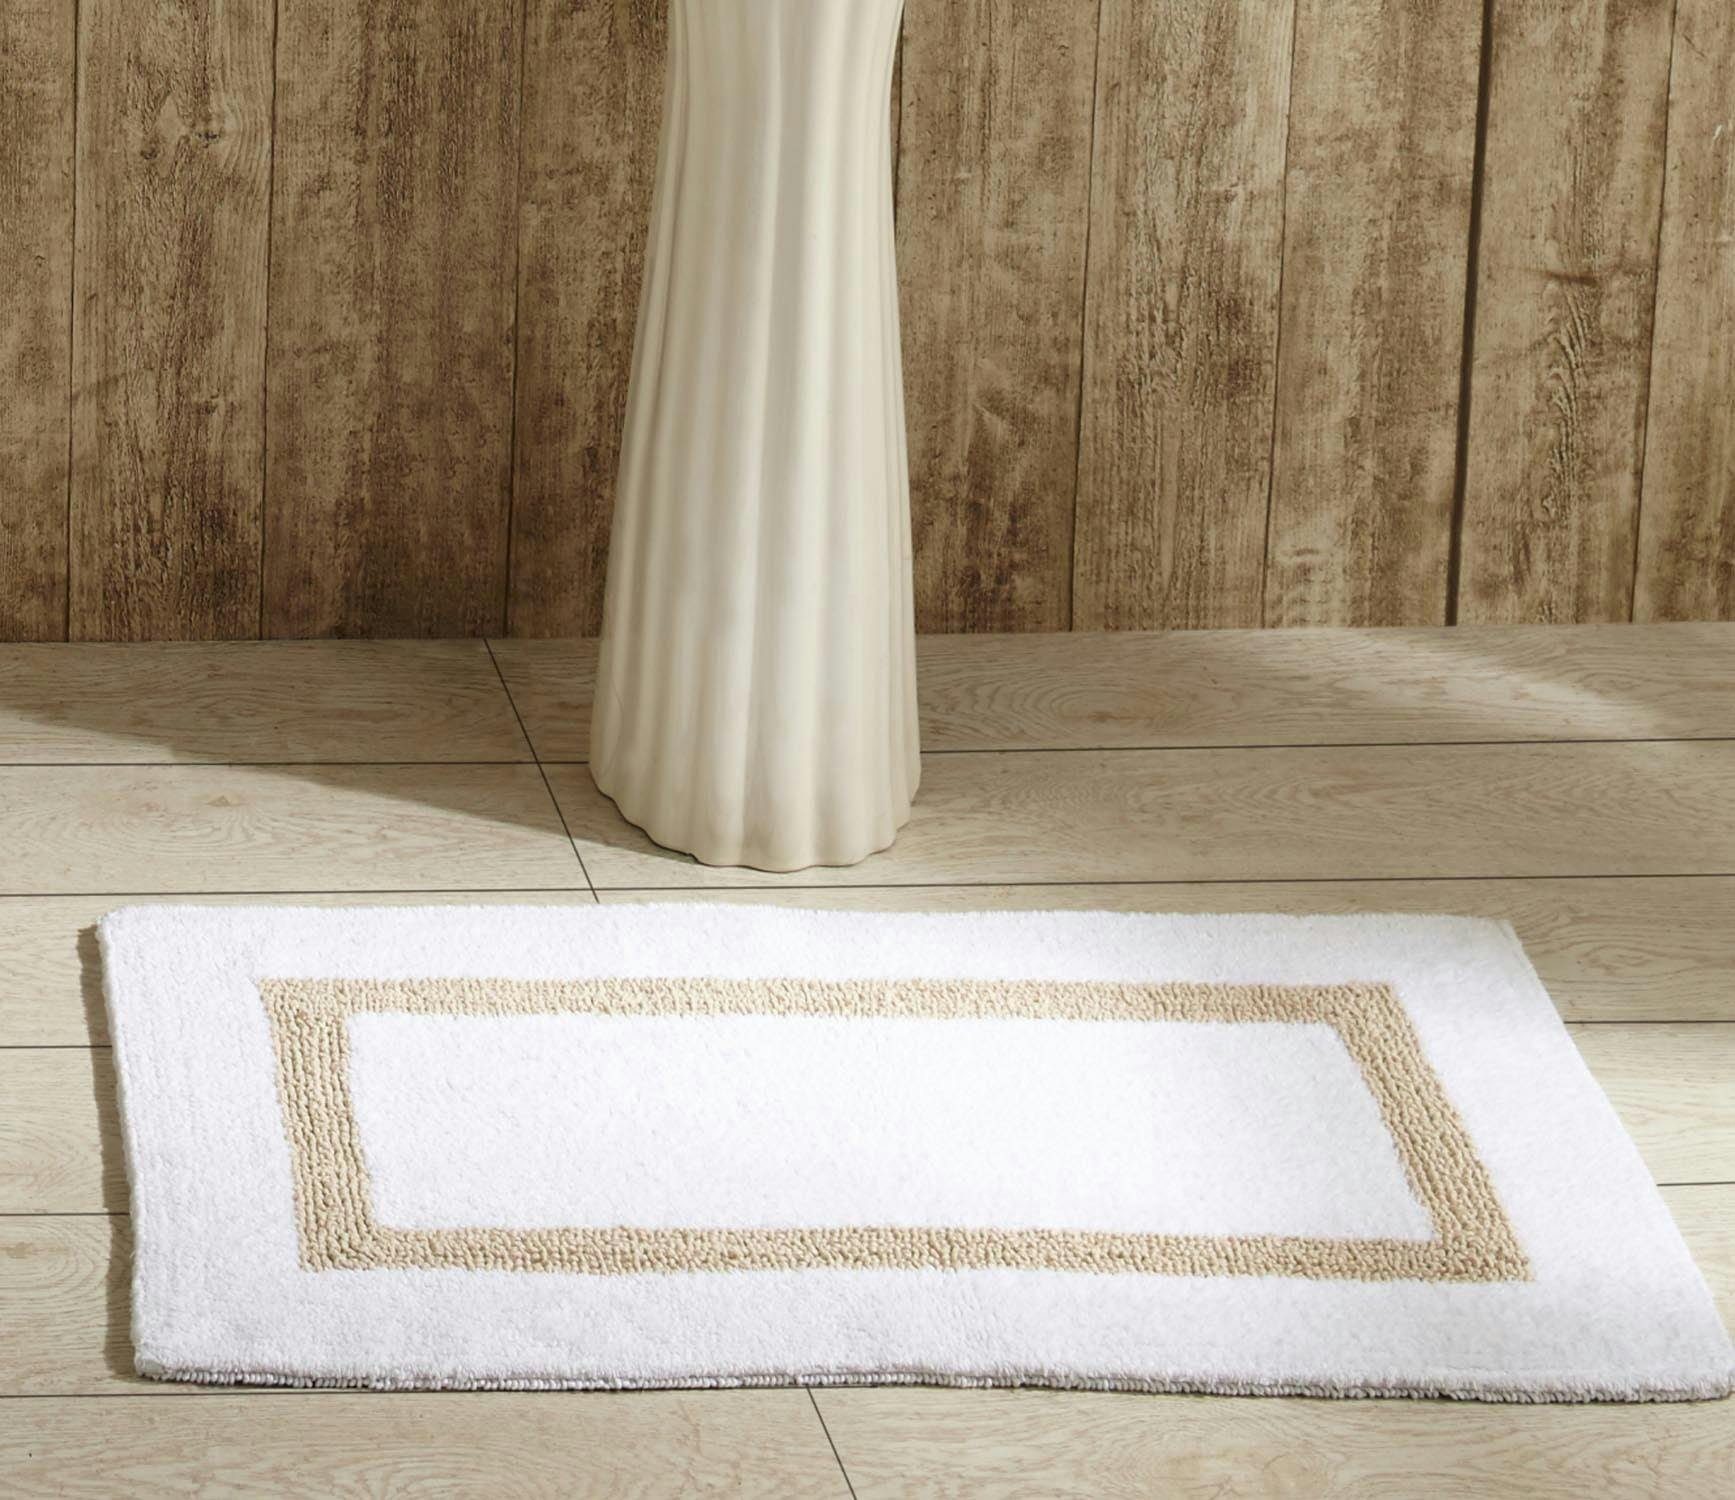 Plush Reversible Cotton Bath Mat Rug in White and Sand, 17" x 24"